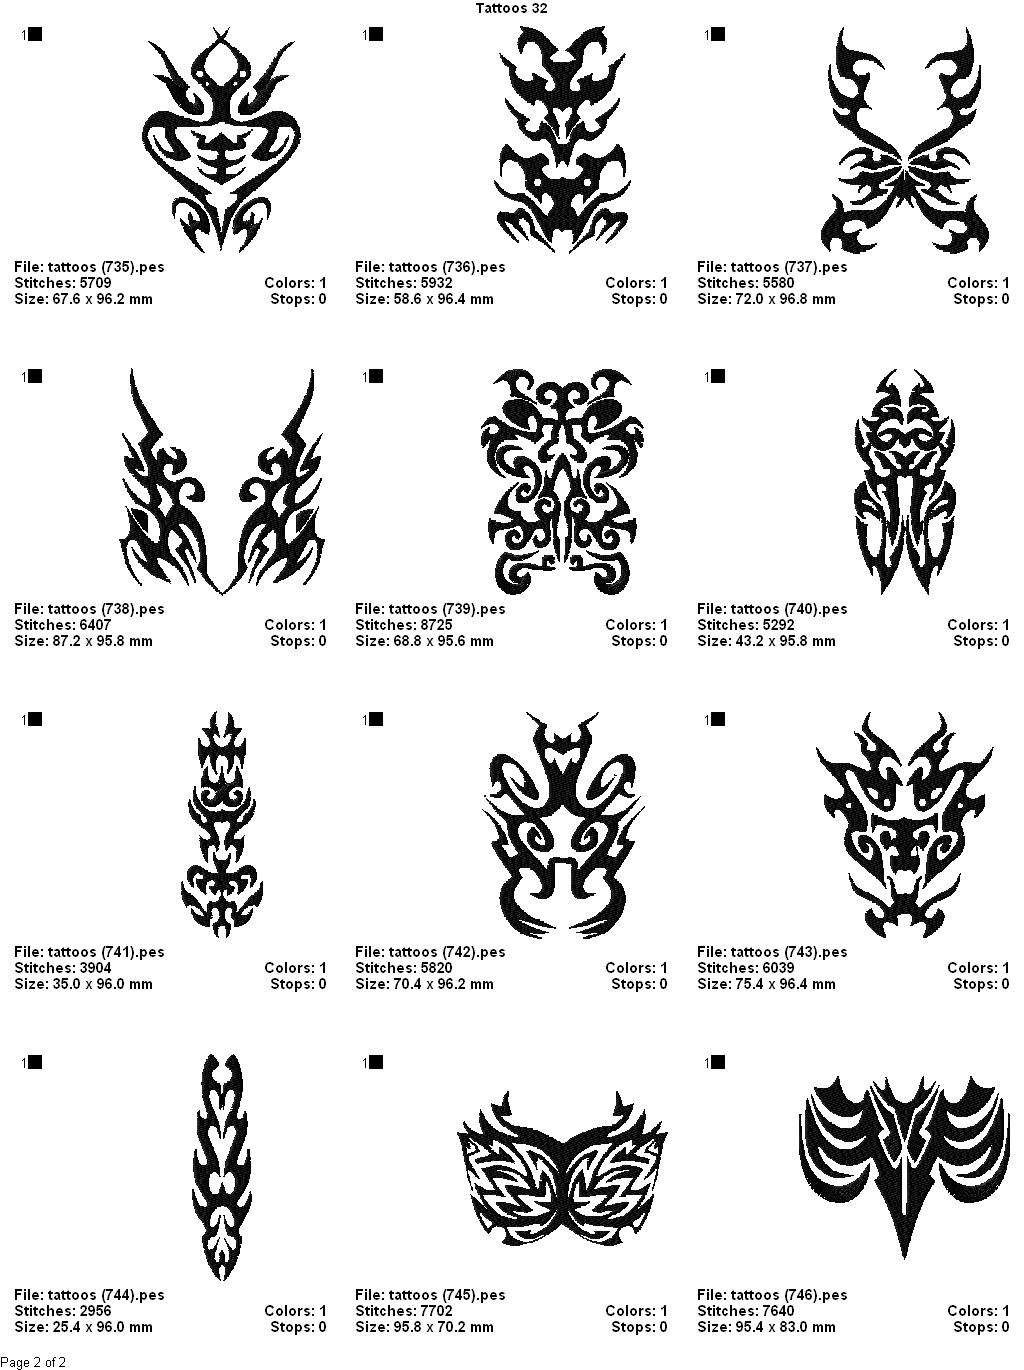 THERE ARE 24 BEAUTIFUL ALL ORIGINAL MACHINE EMBROIDERY TATTOO ABSTRACT